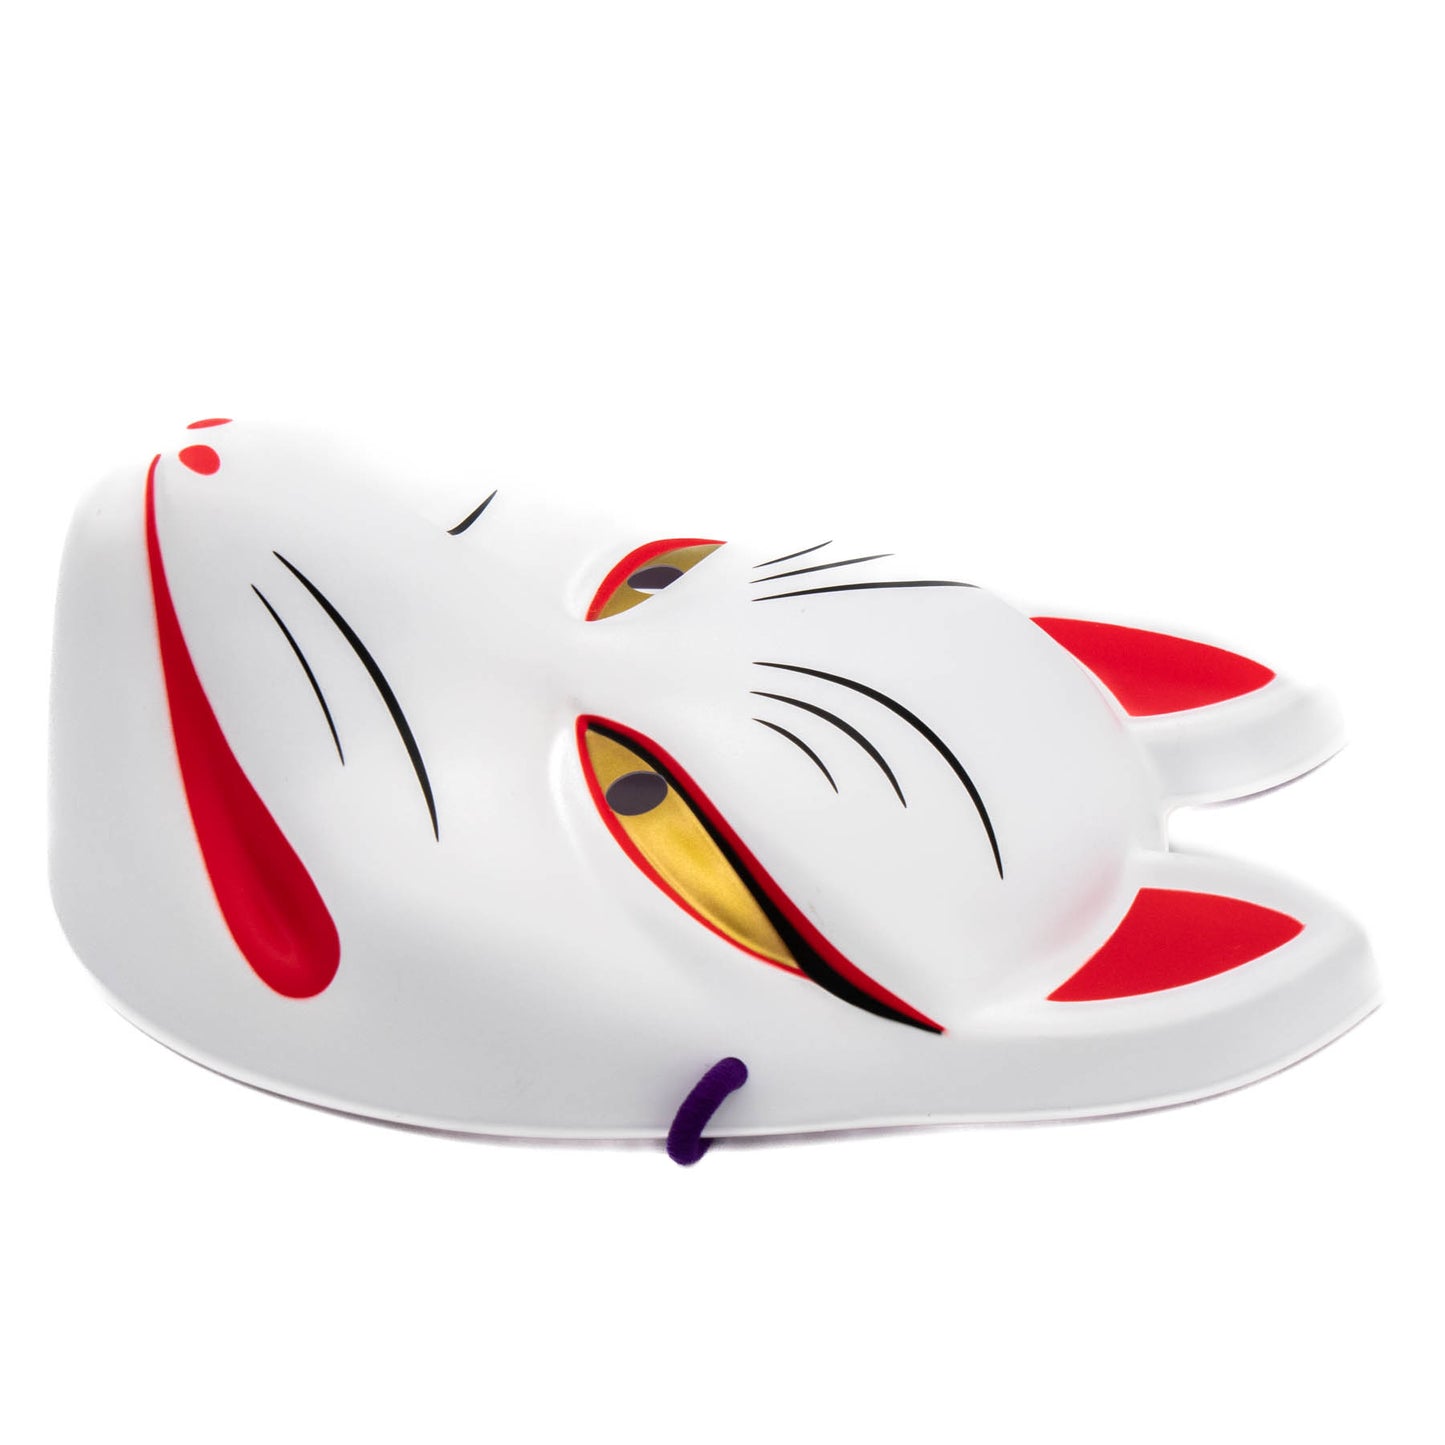 Japanese Fox Mask - Red and White